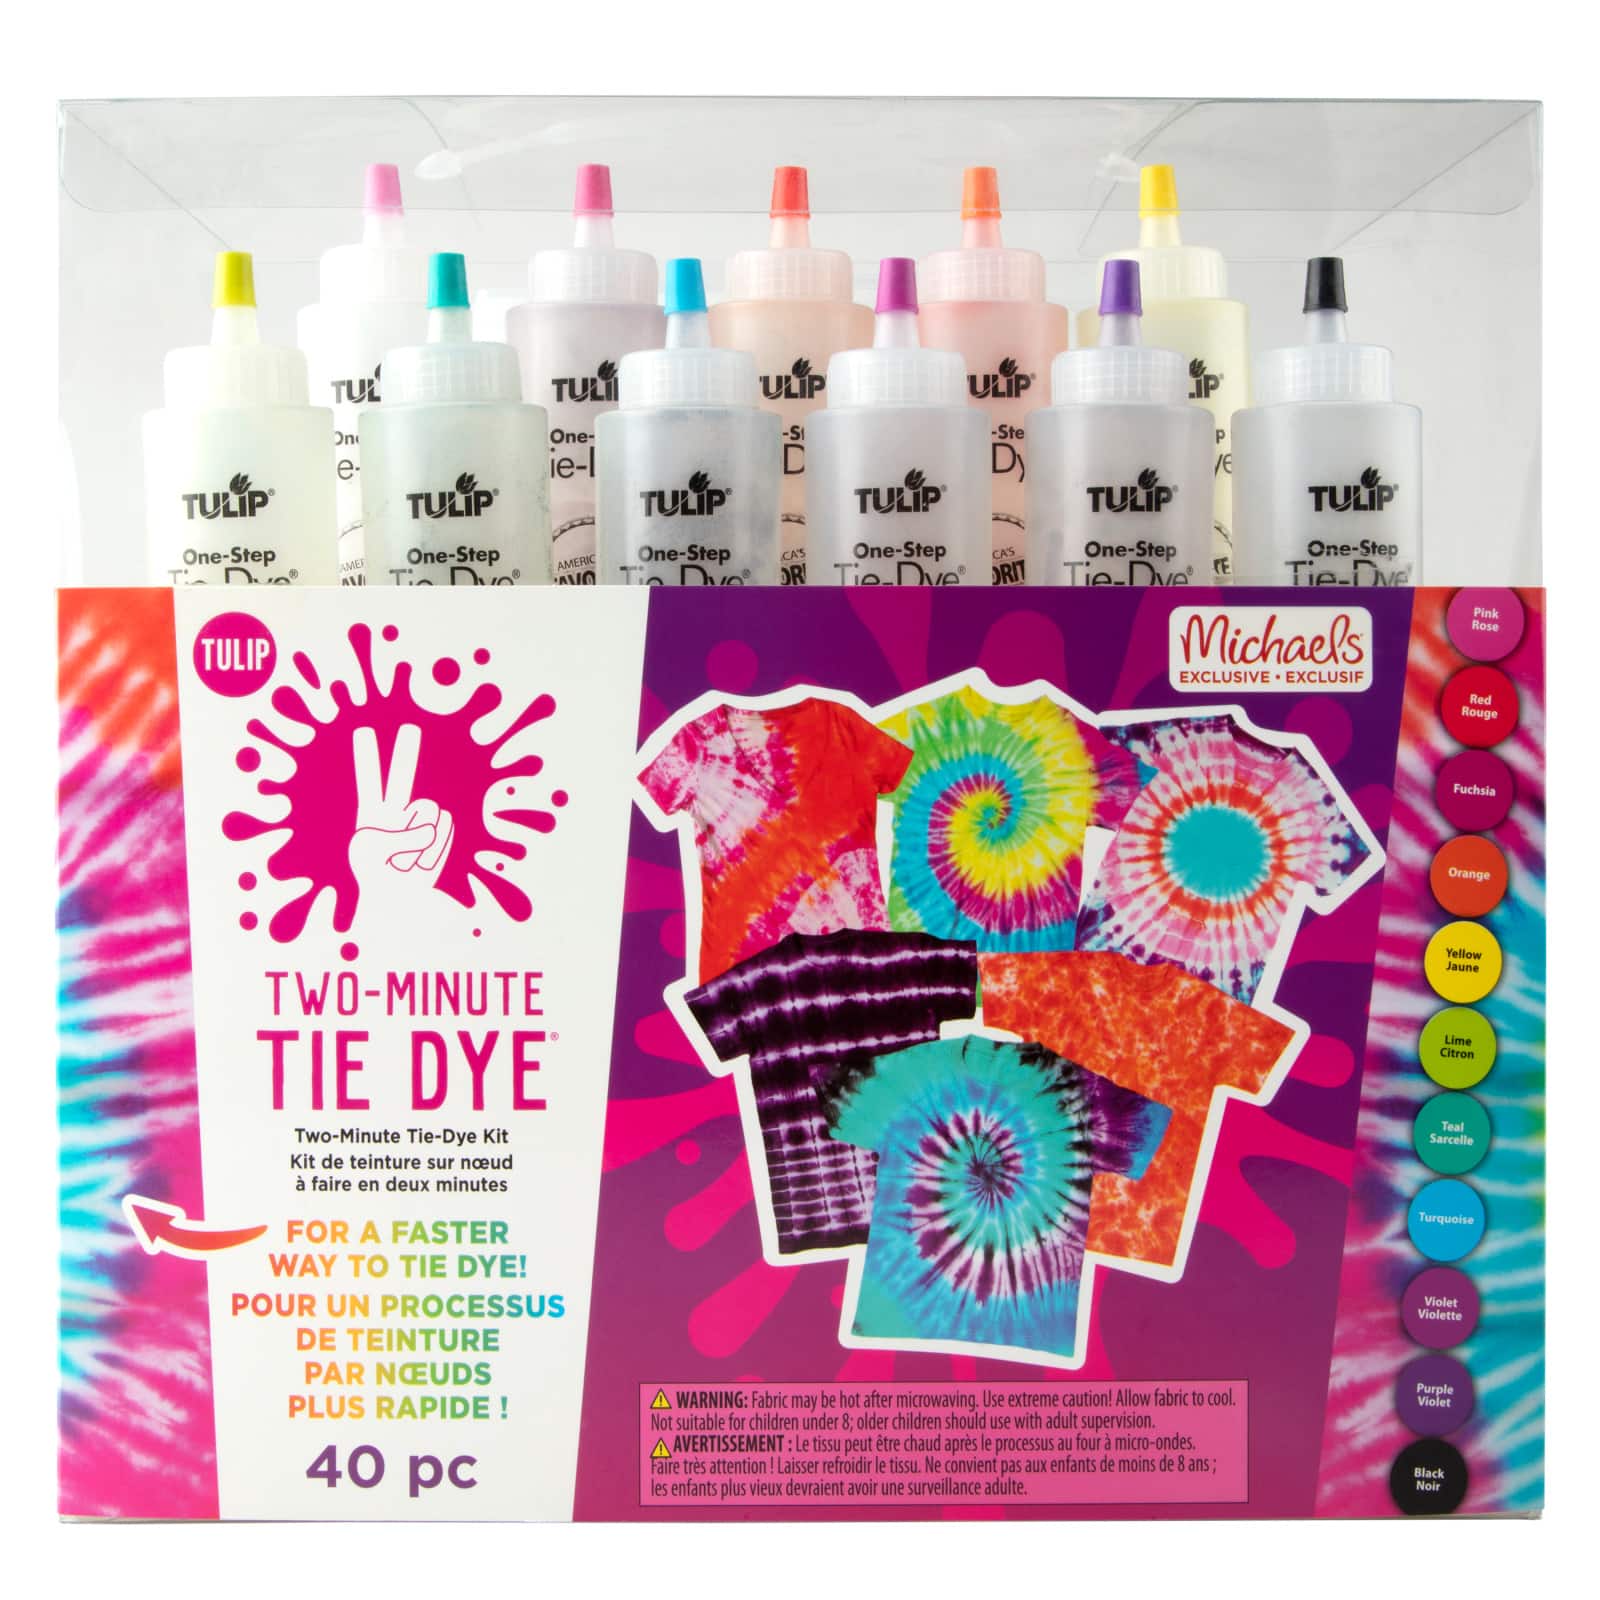 Tie Dye Birthday Party Invitations - Tie Dye Party Supplies - Fill